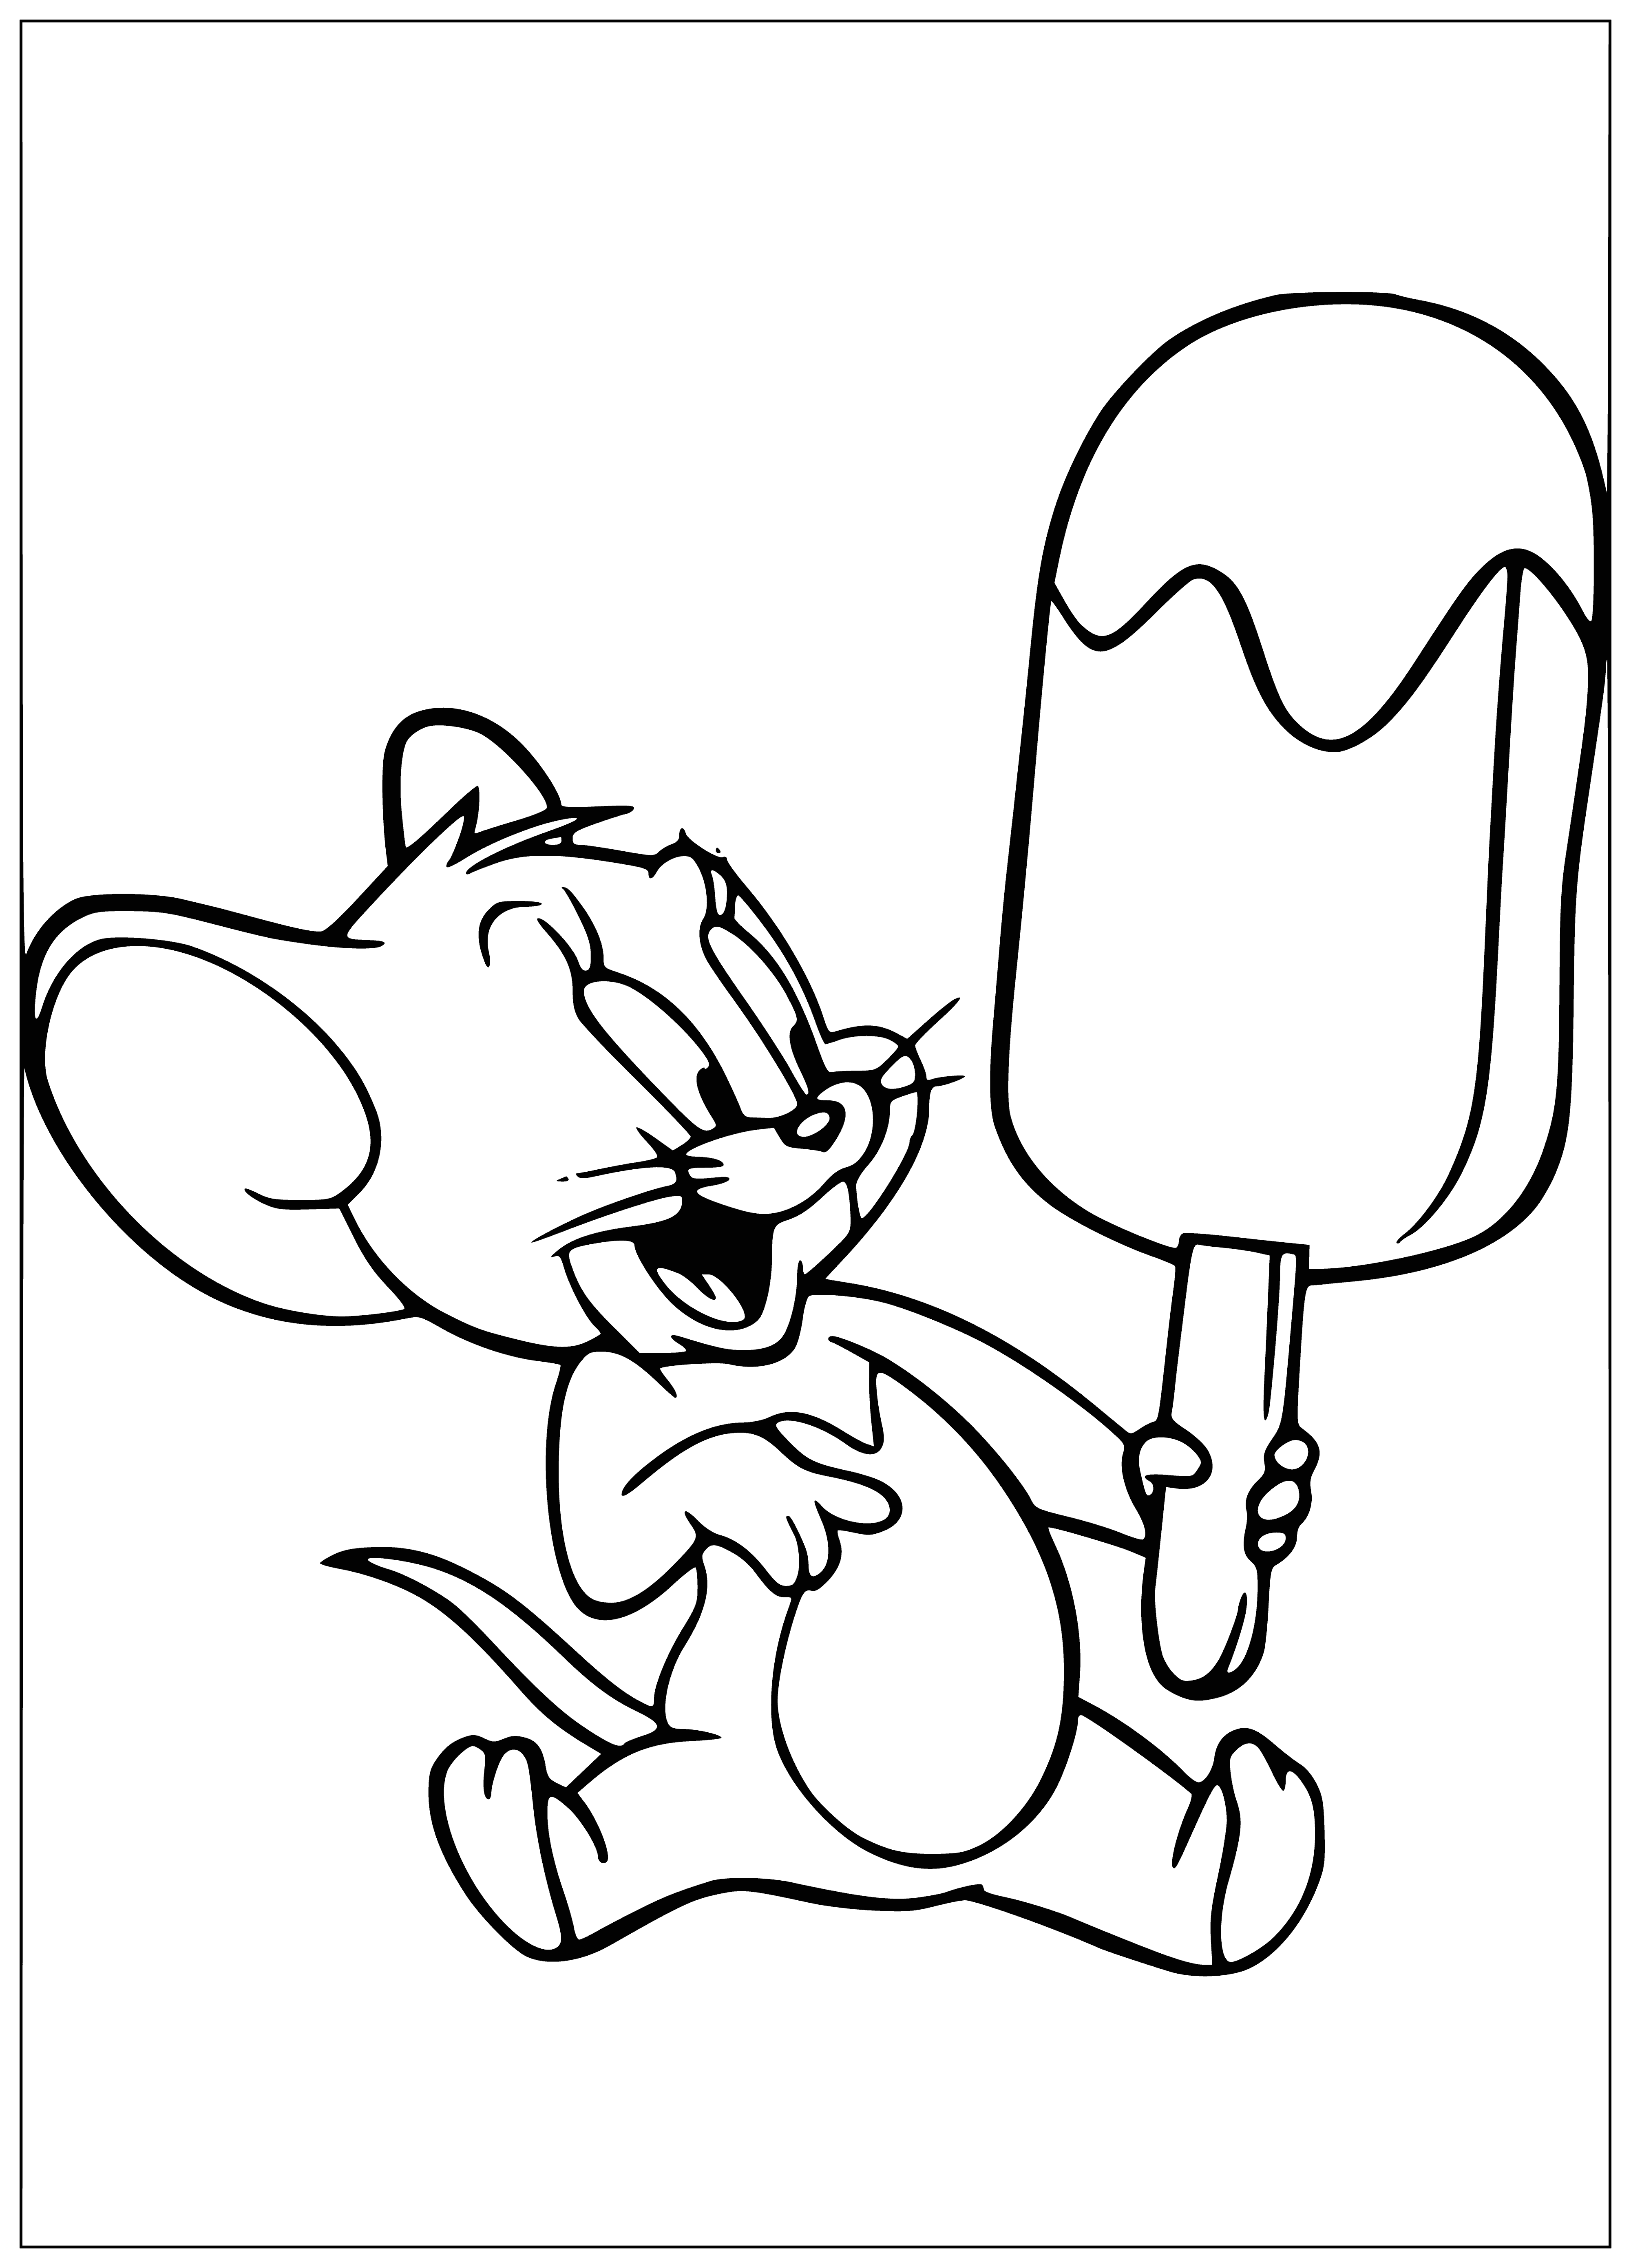 Jerry and Popsicle coloring page